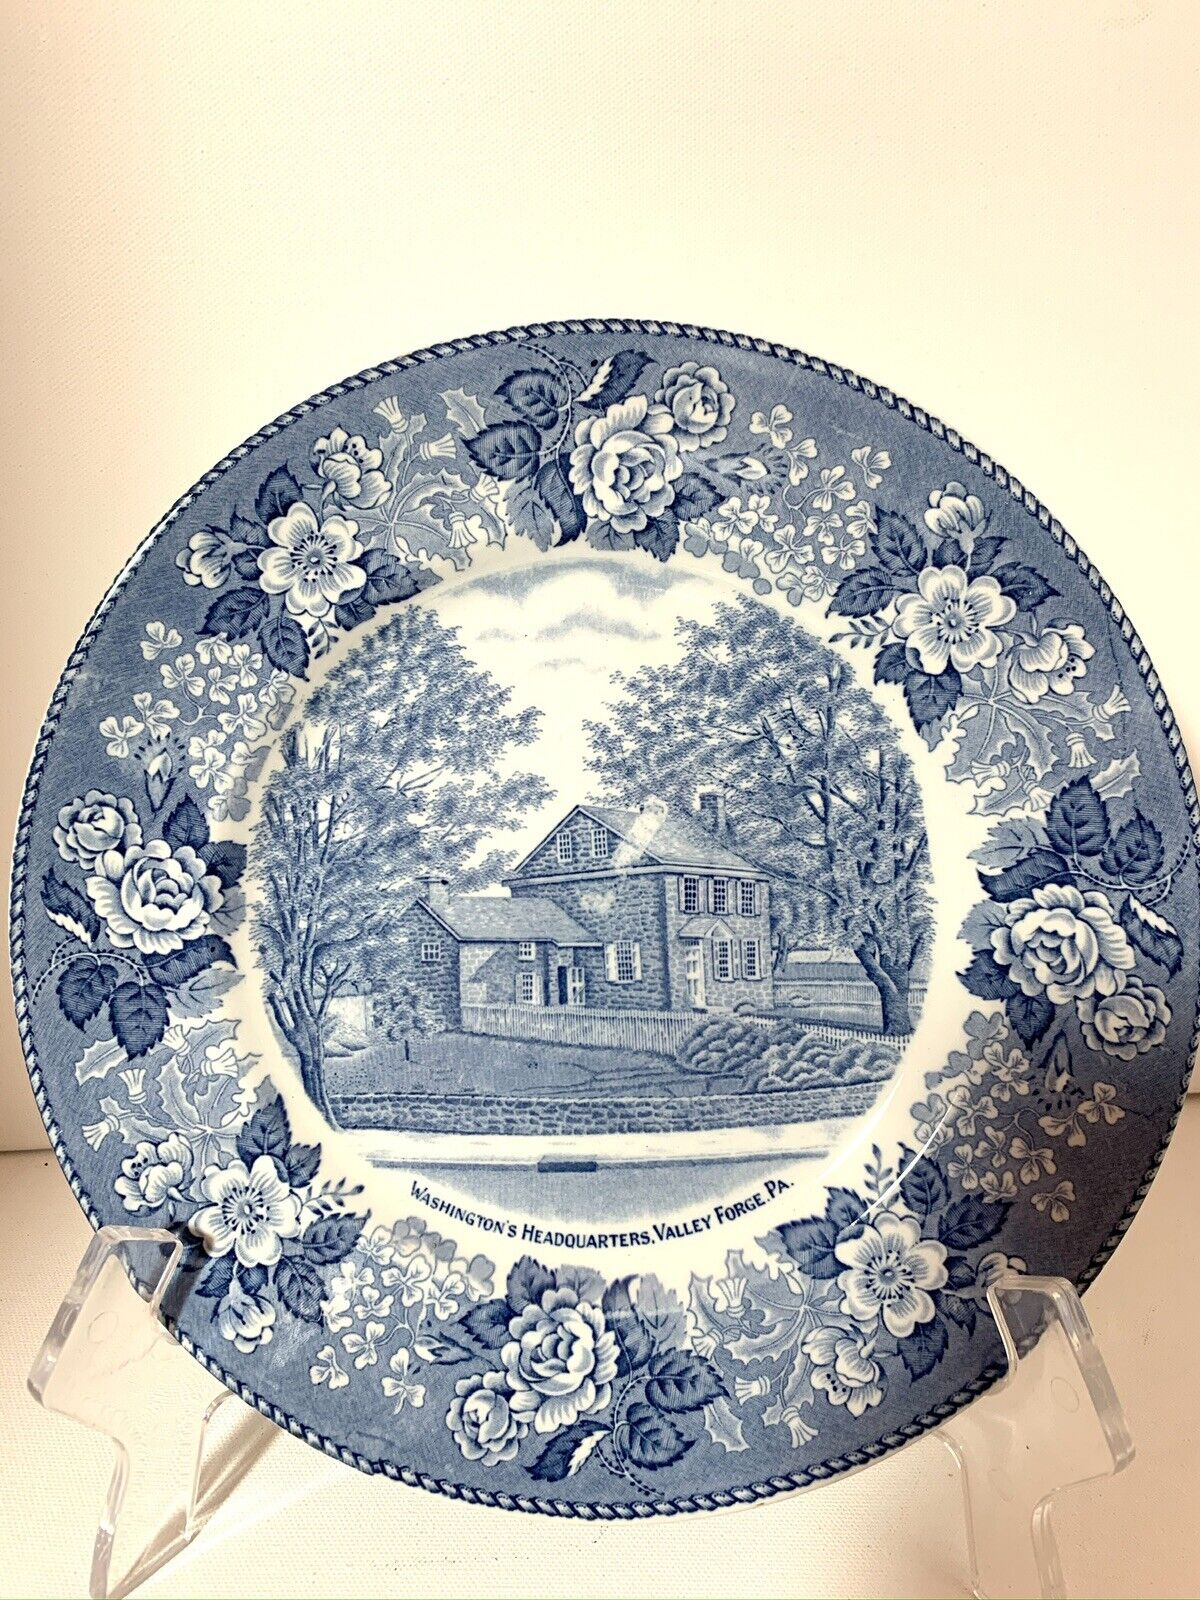 Collectible Plate Historic Valley Forge Plate By Staffordshire Blue And White